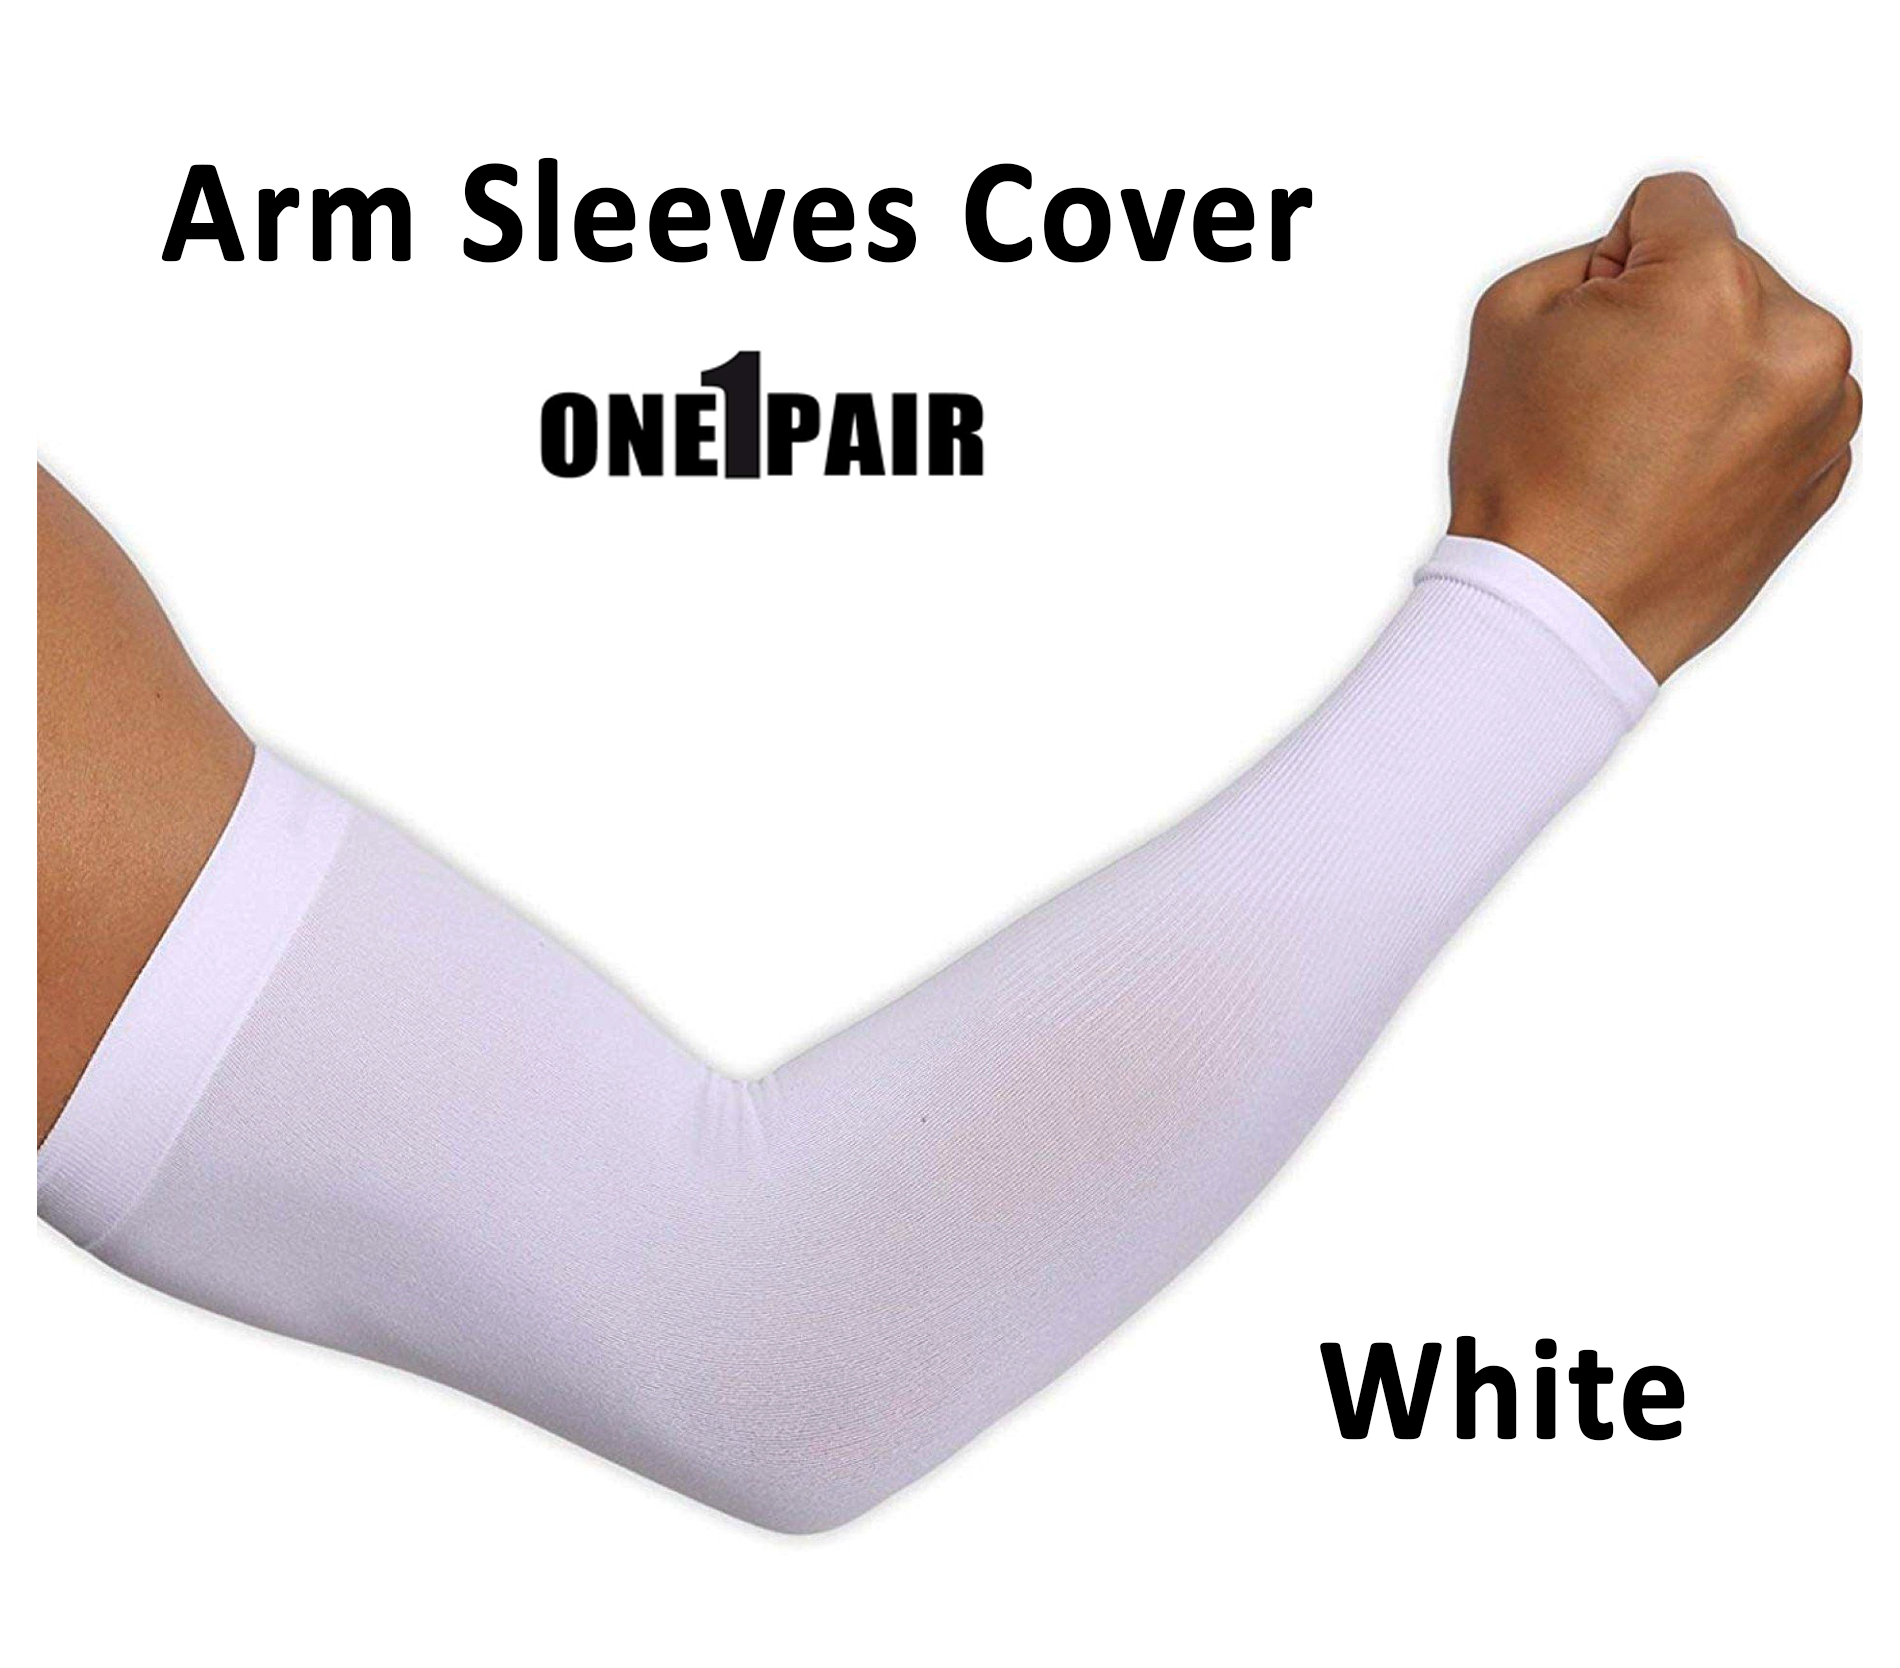 Best Quality Arms Sleeves for Sports Stretchable Fabric Breathable Arms  Cover for Outdoor and Indoor Use in Black and White (Pack of 1 Pair, 2 Pcs,  Free Size)